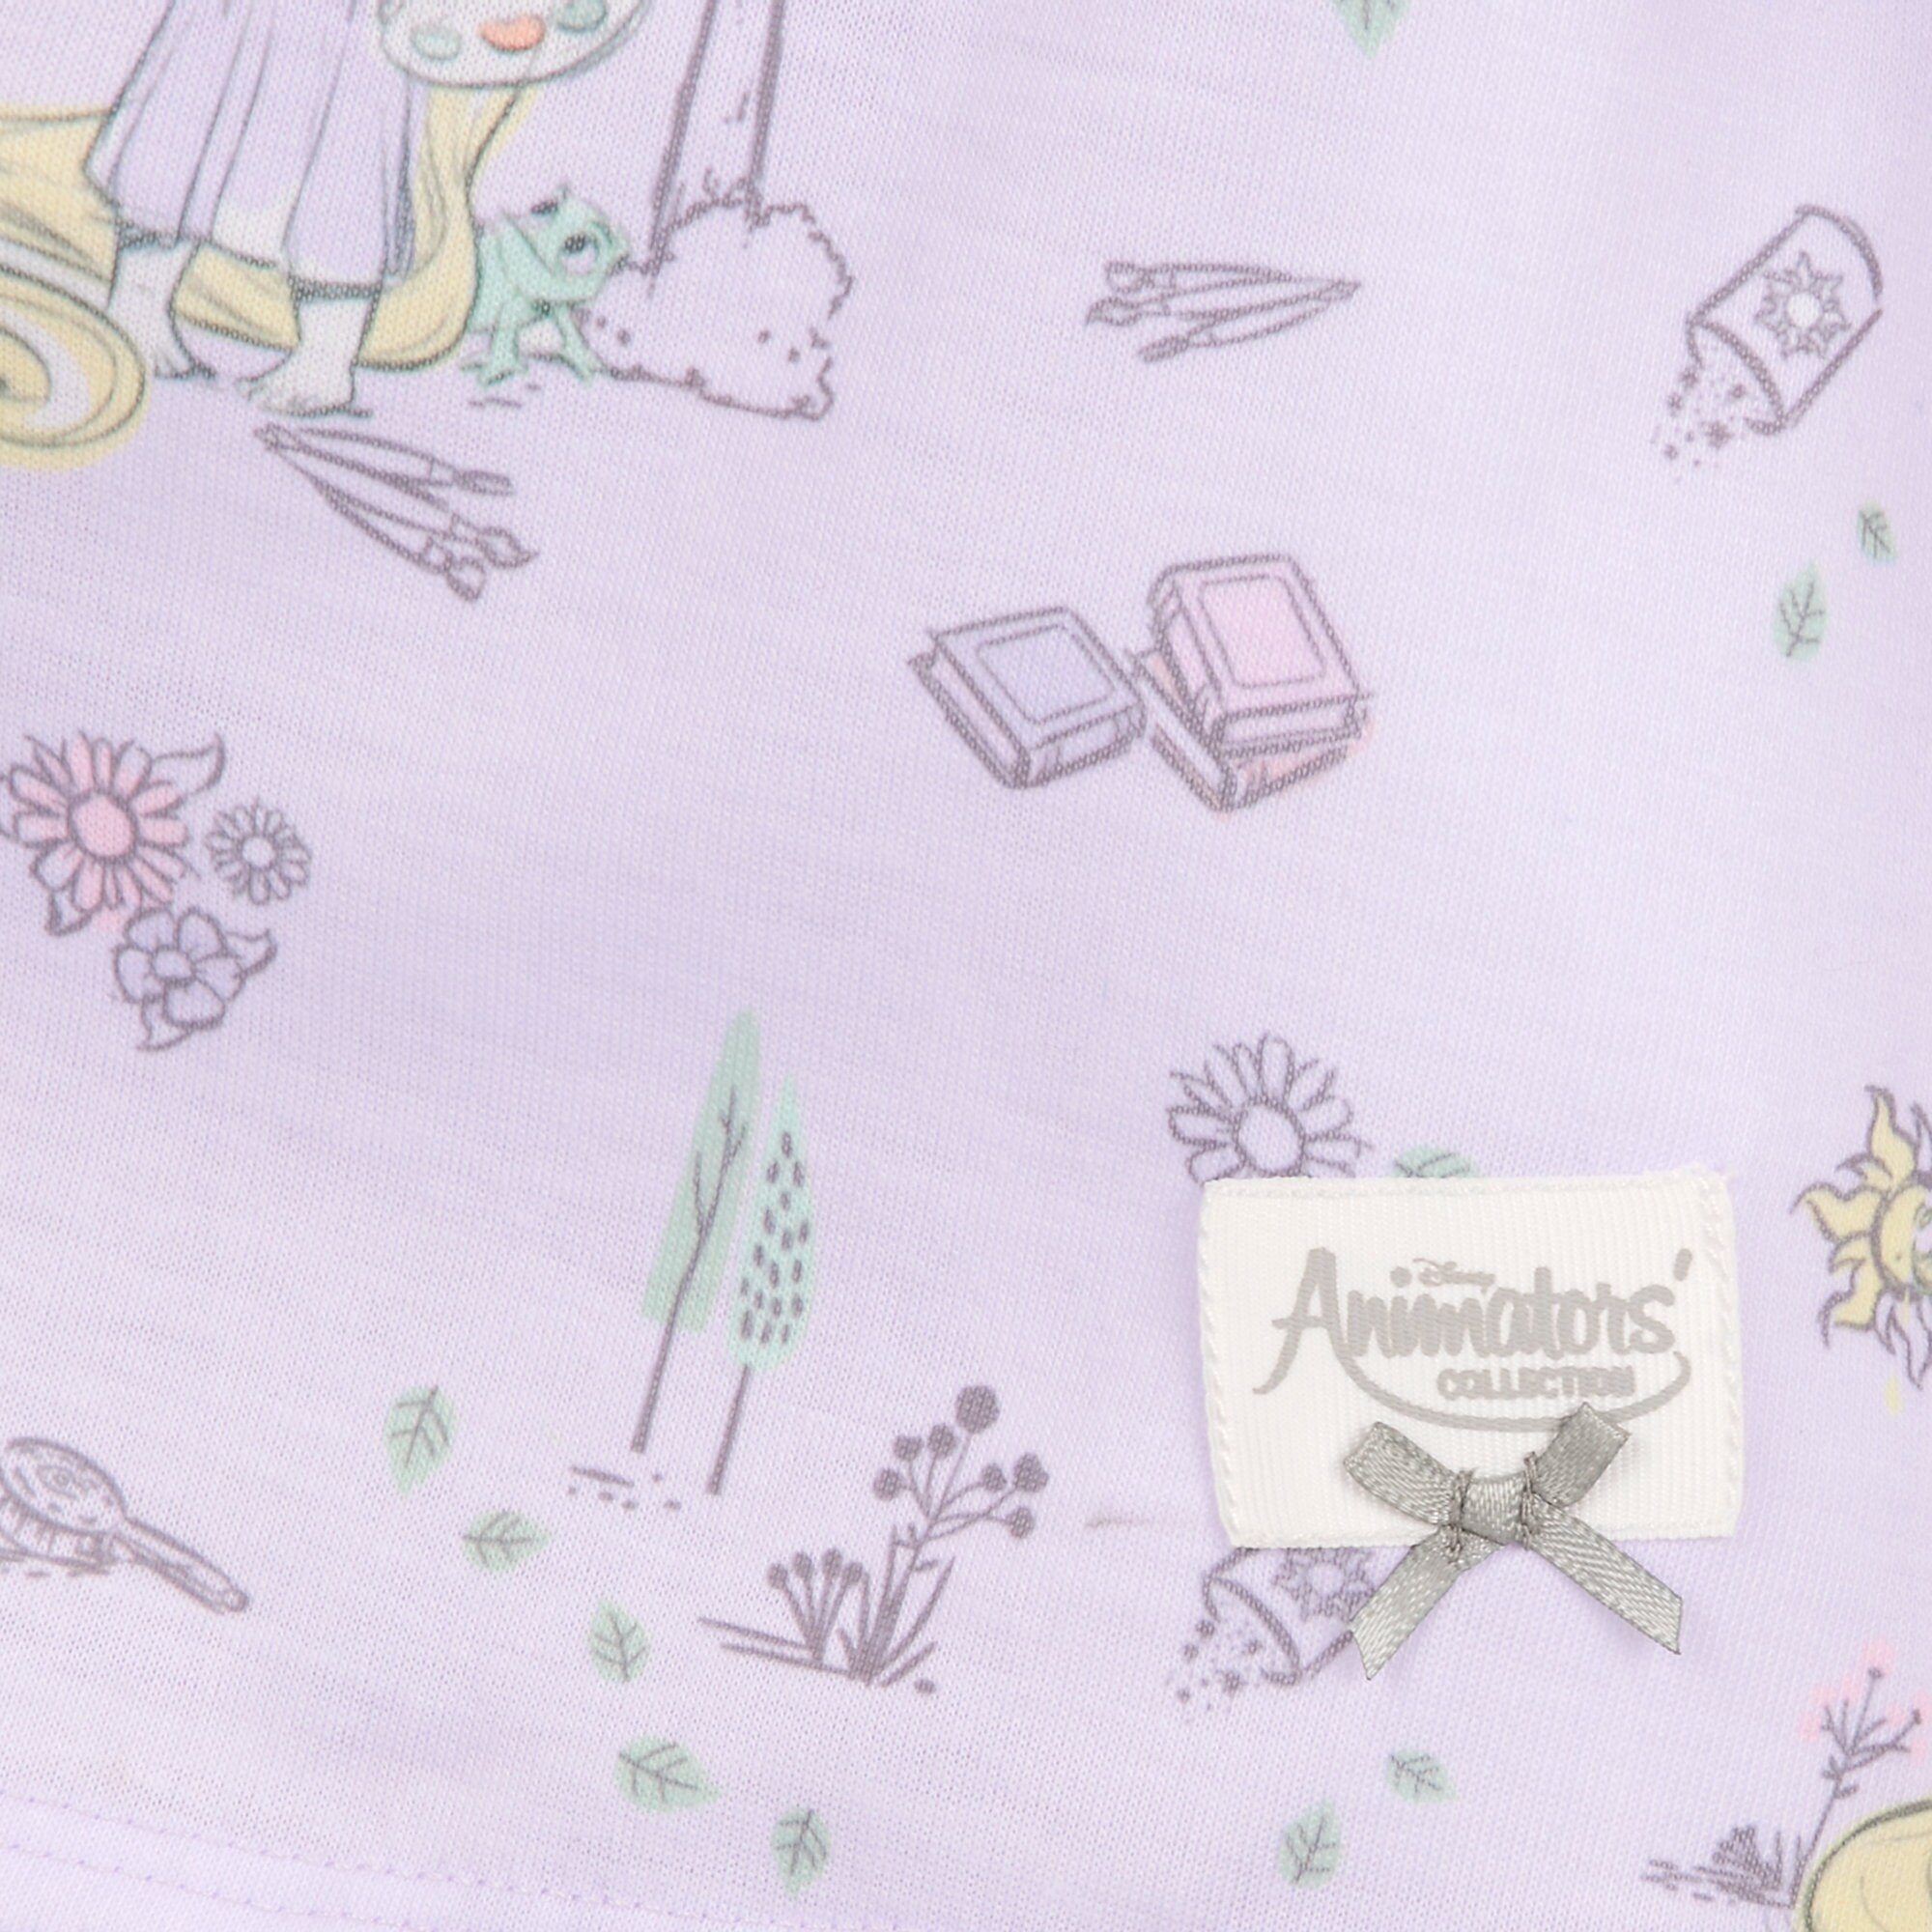 Disney Animators' Collection Rapunzel Sleep Gown Set for Kids and Doll